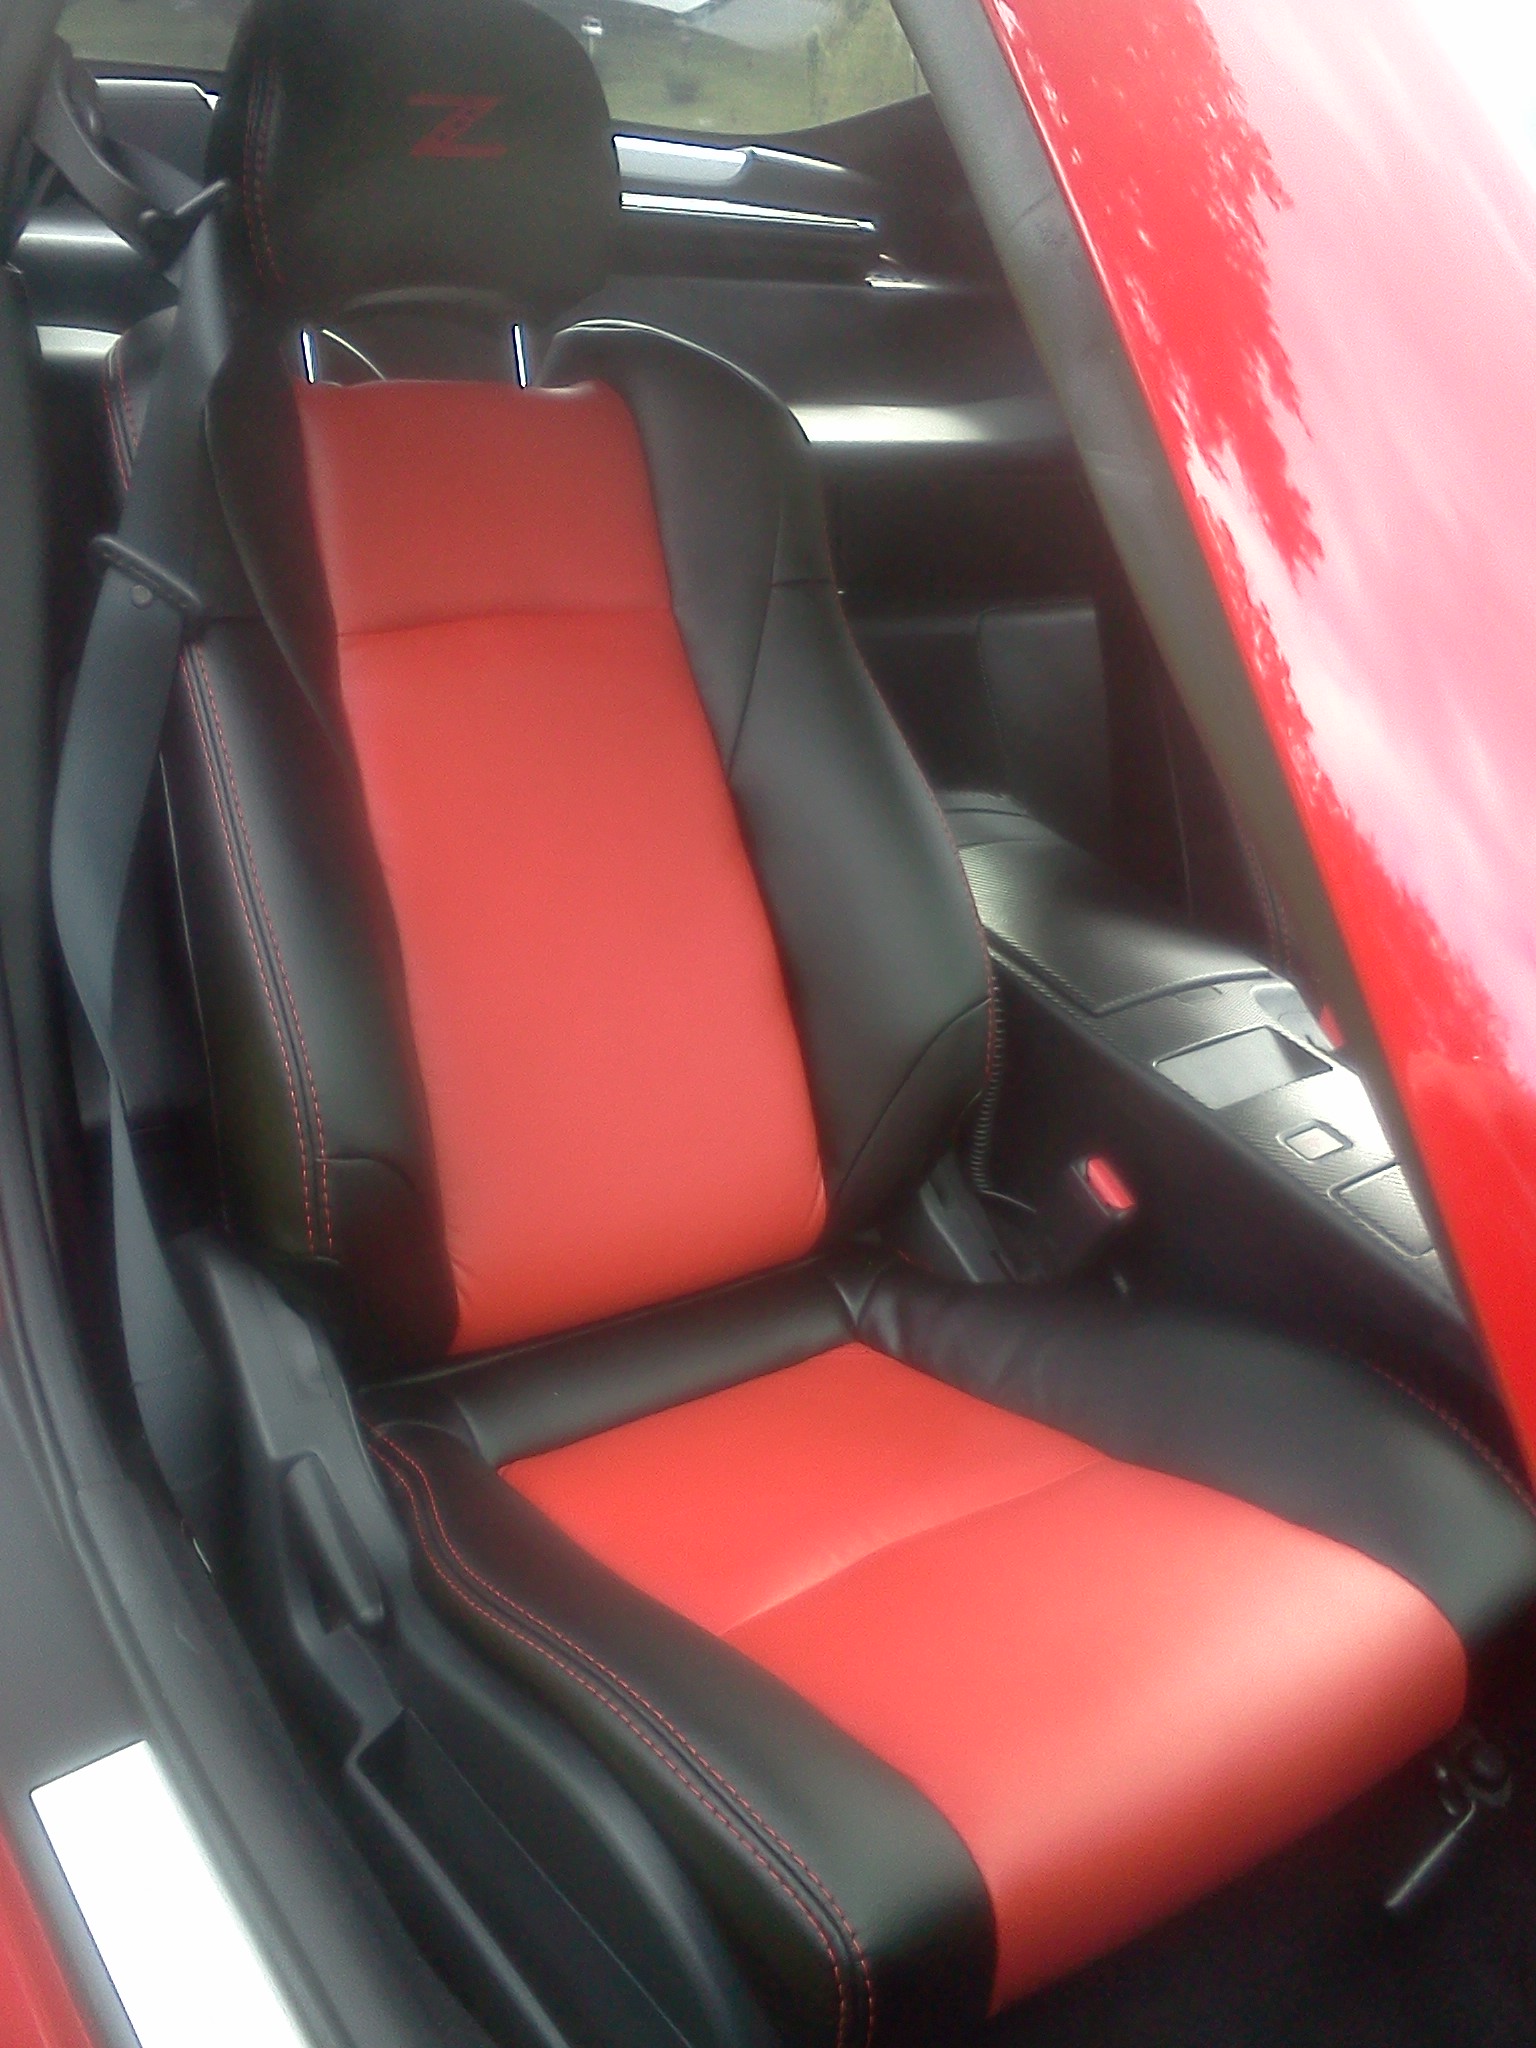 0208 NISSAN 350Z GENUINE LEATHER SEAT COVERS (CUSTOM ORDERS) Interior Innovation